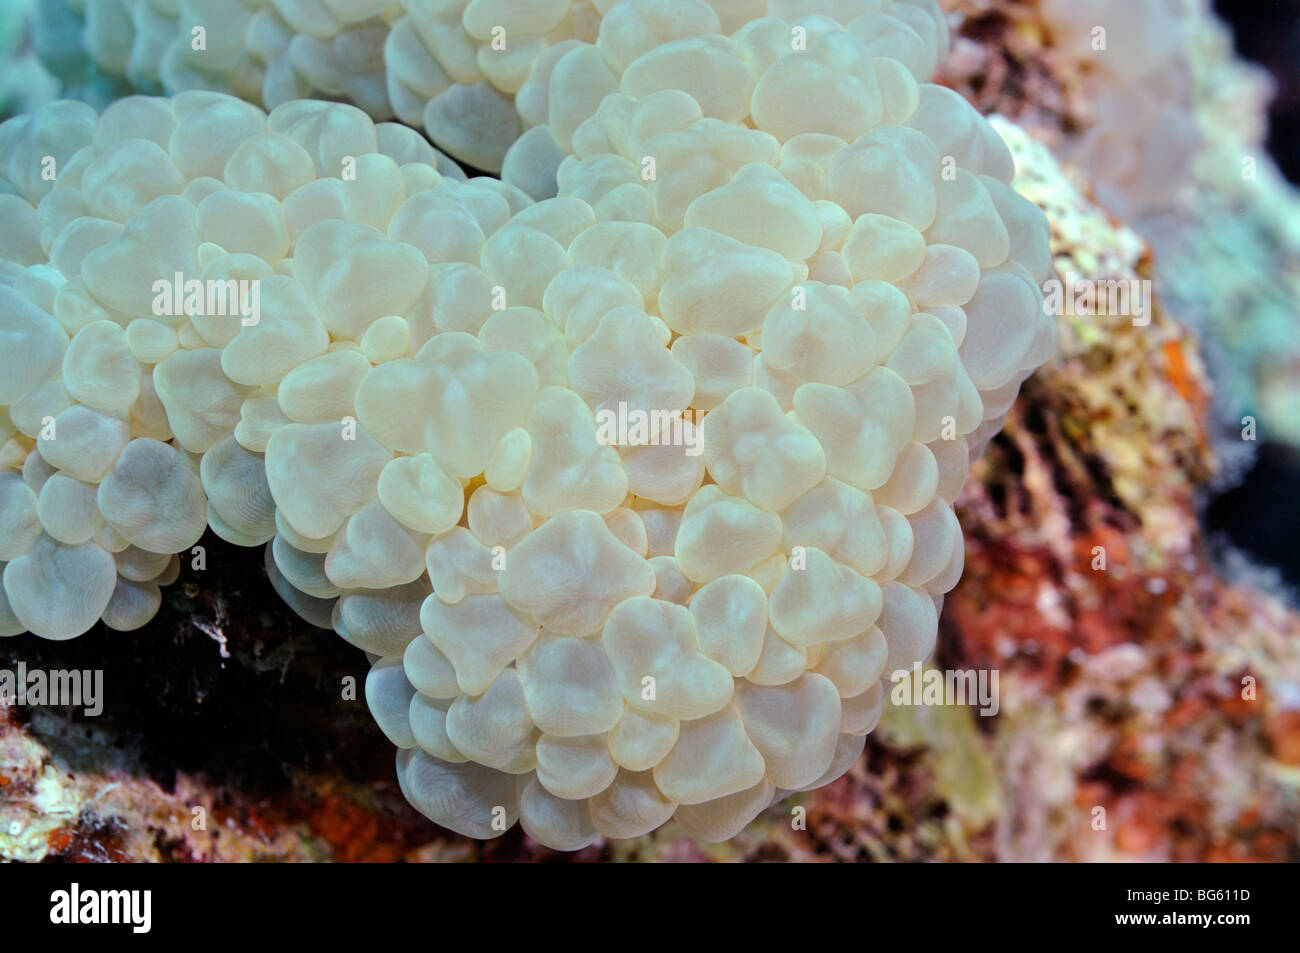 Closeup of 'Bubble coral', Plerogyra sinuosa species, on coral reef Stock Photo